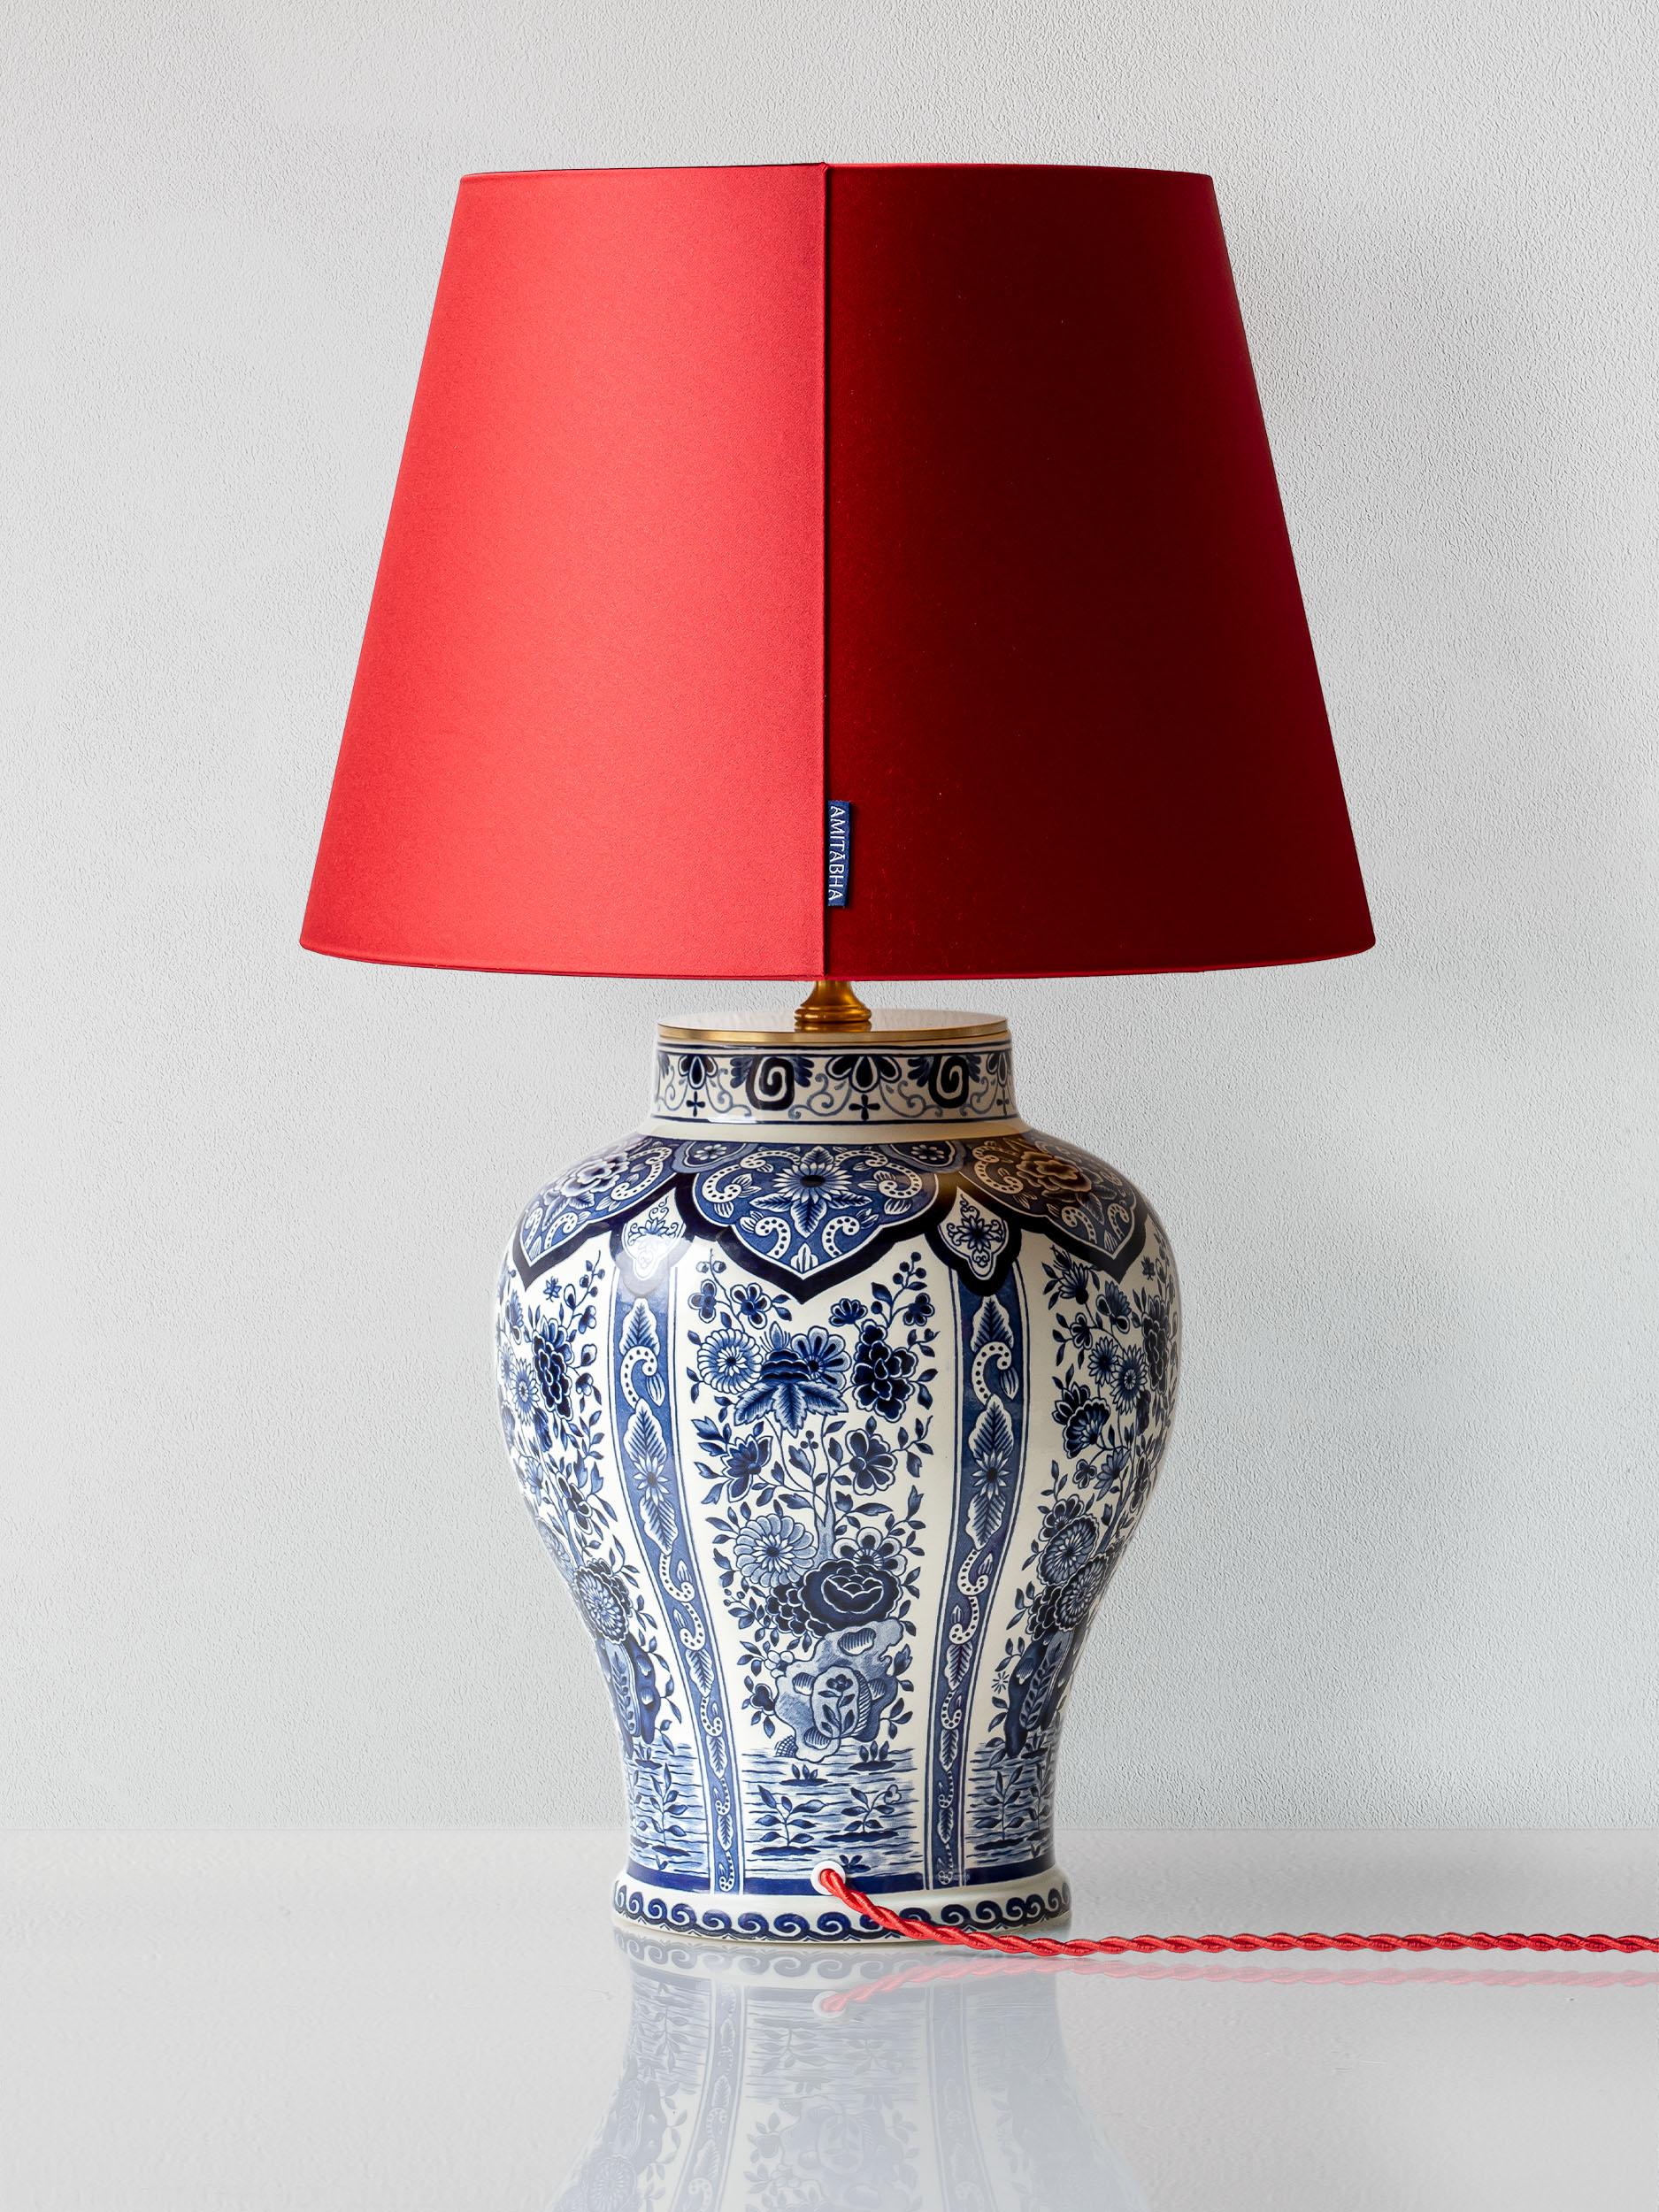 Hand-Crafted Delft Blue Boch Frères Keramis Table Lamps, 1969-1979, Red Satin Shades For Sale